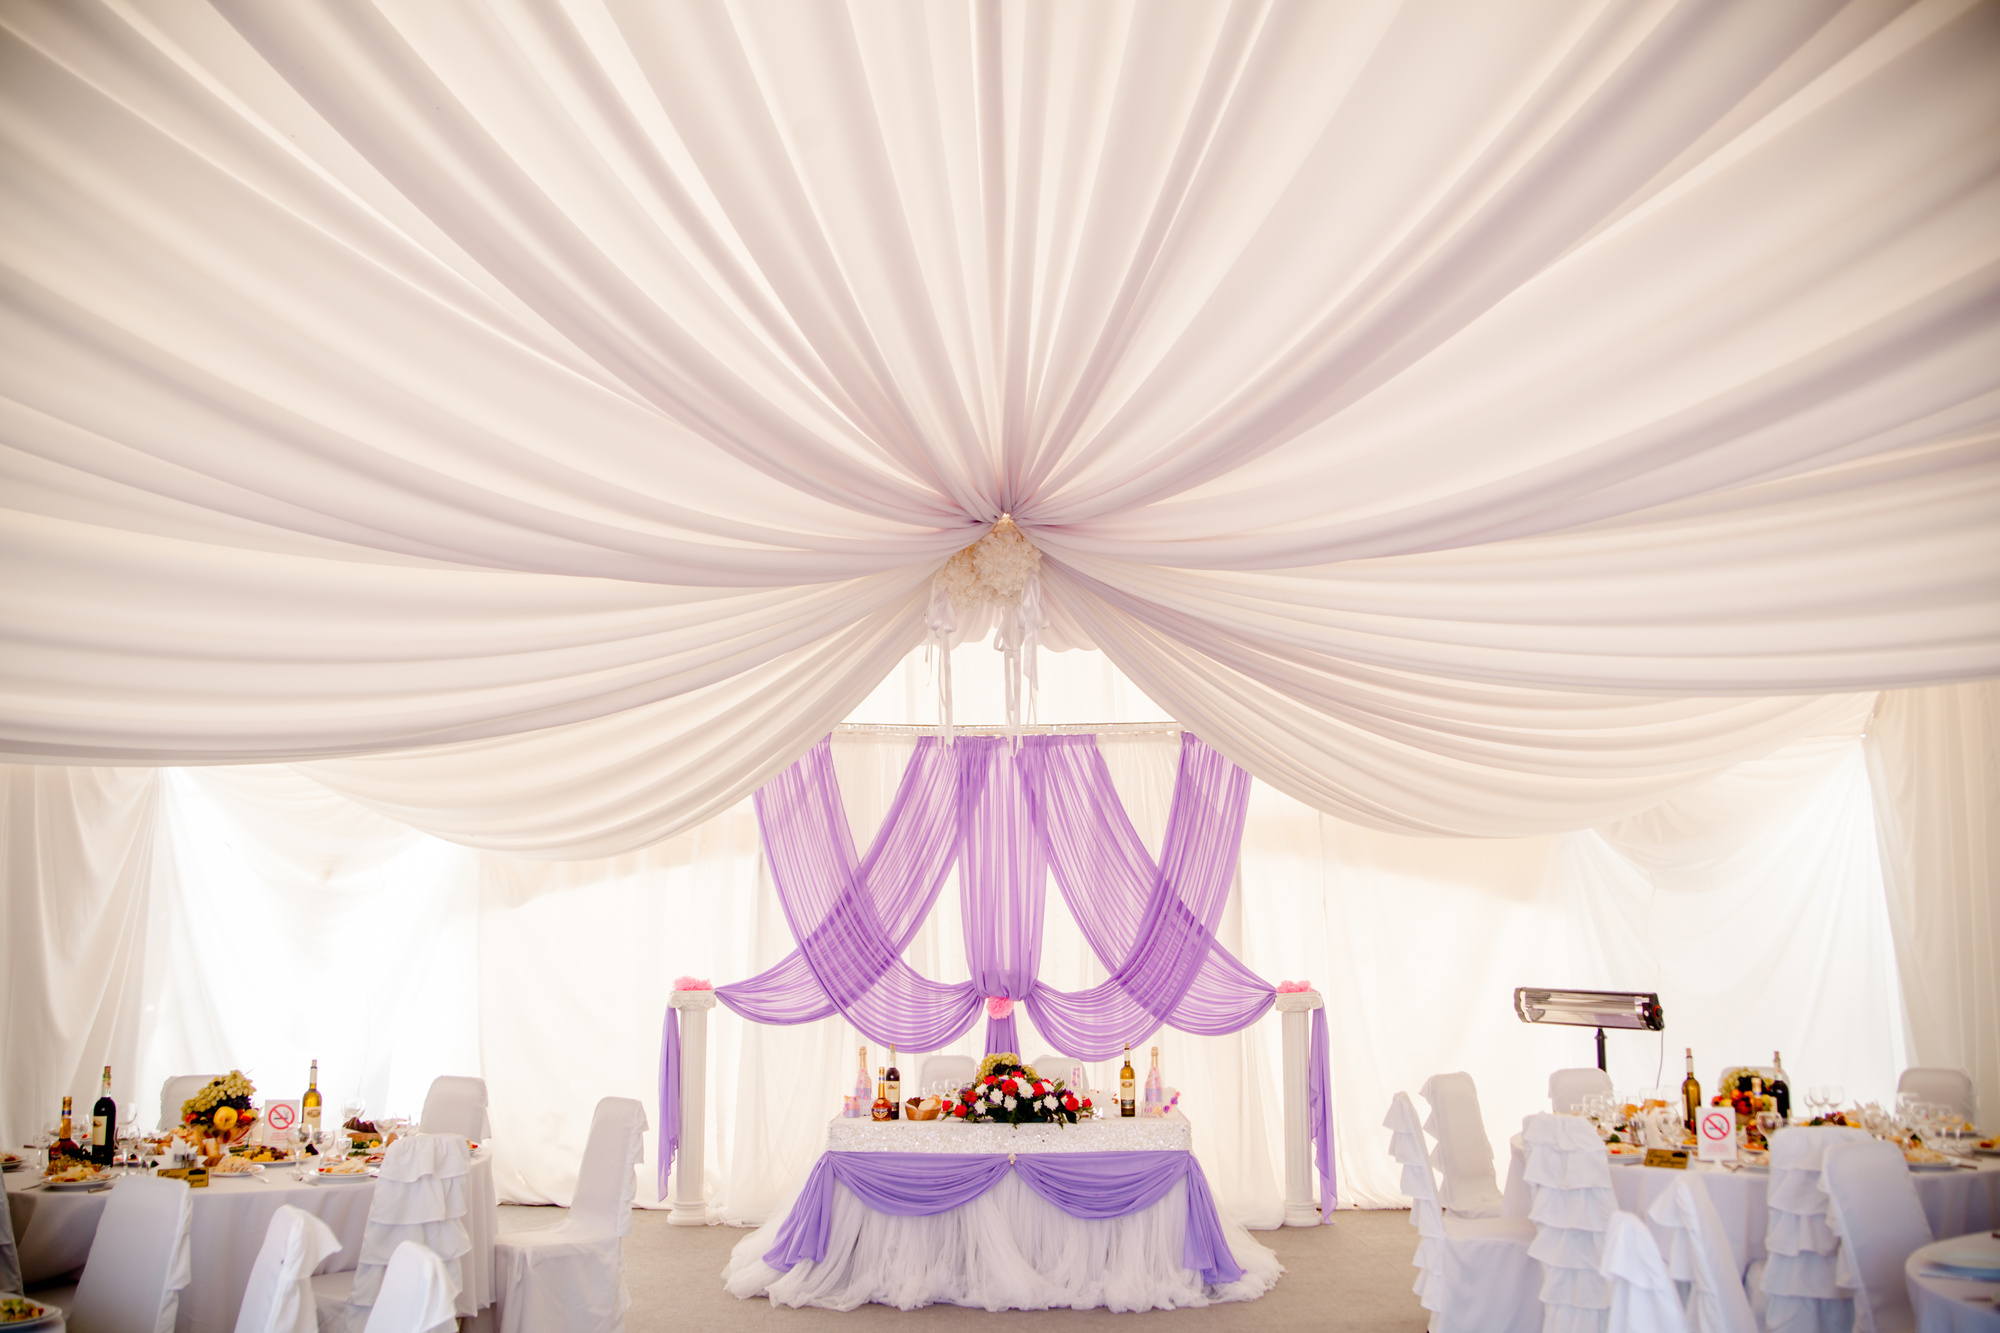 A Bride's Practical Guide on How to Choose a Wedding Venue » Trending Us